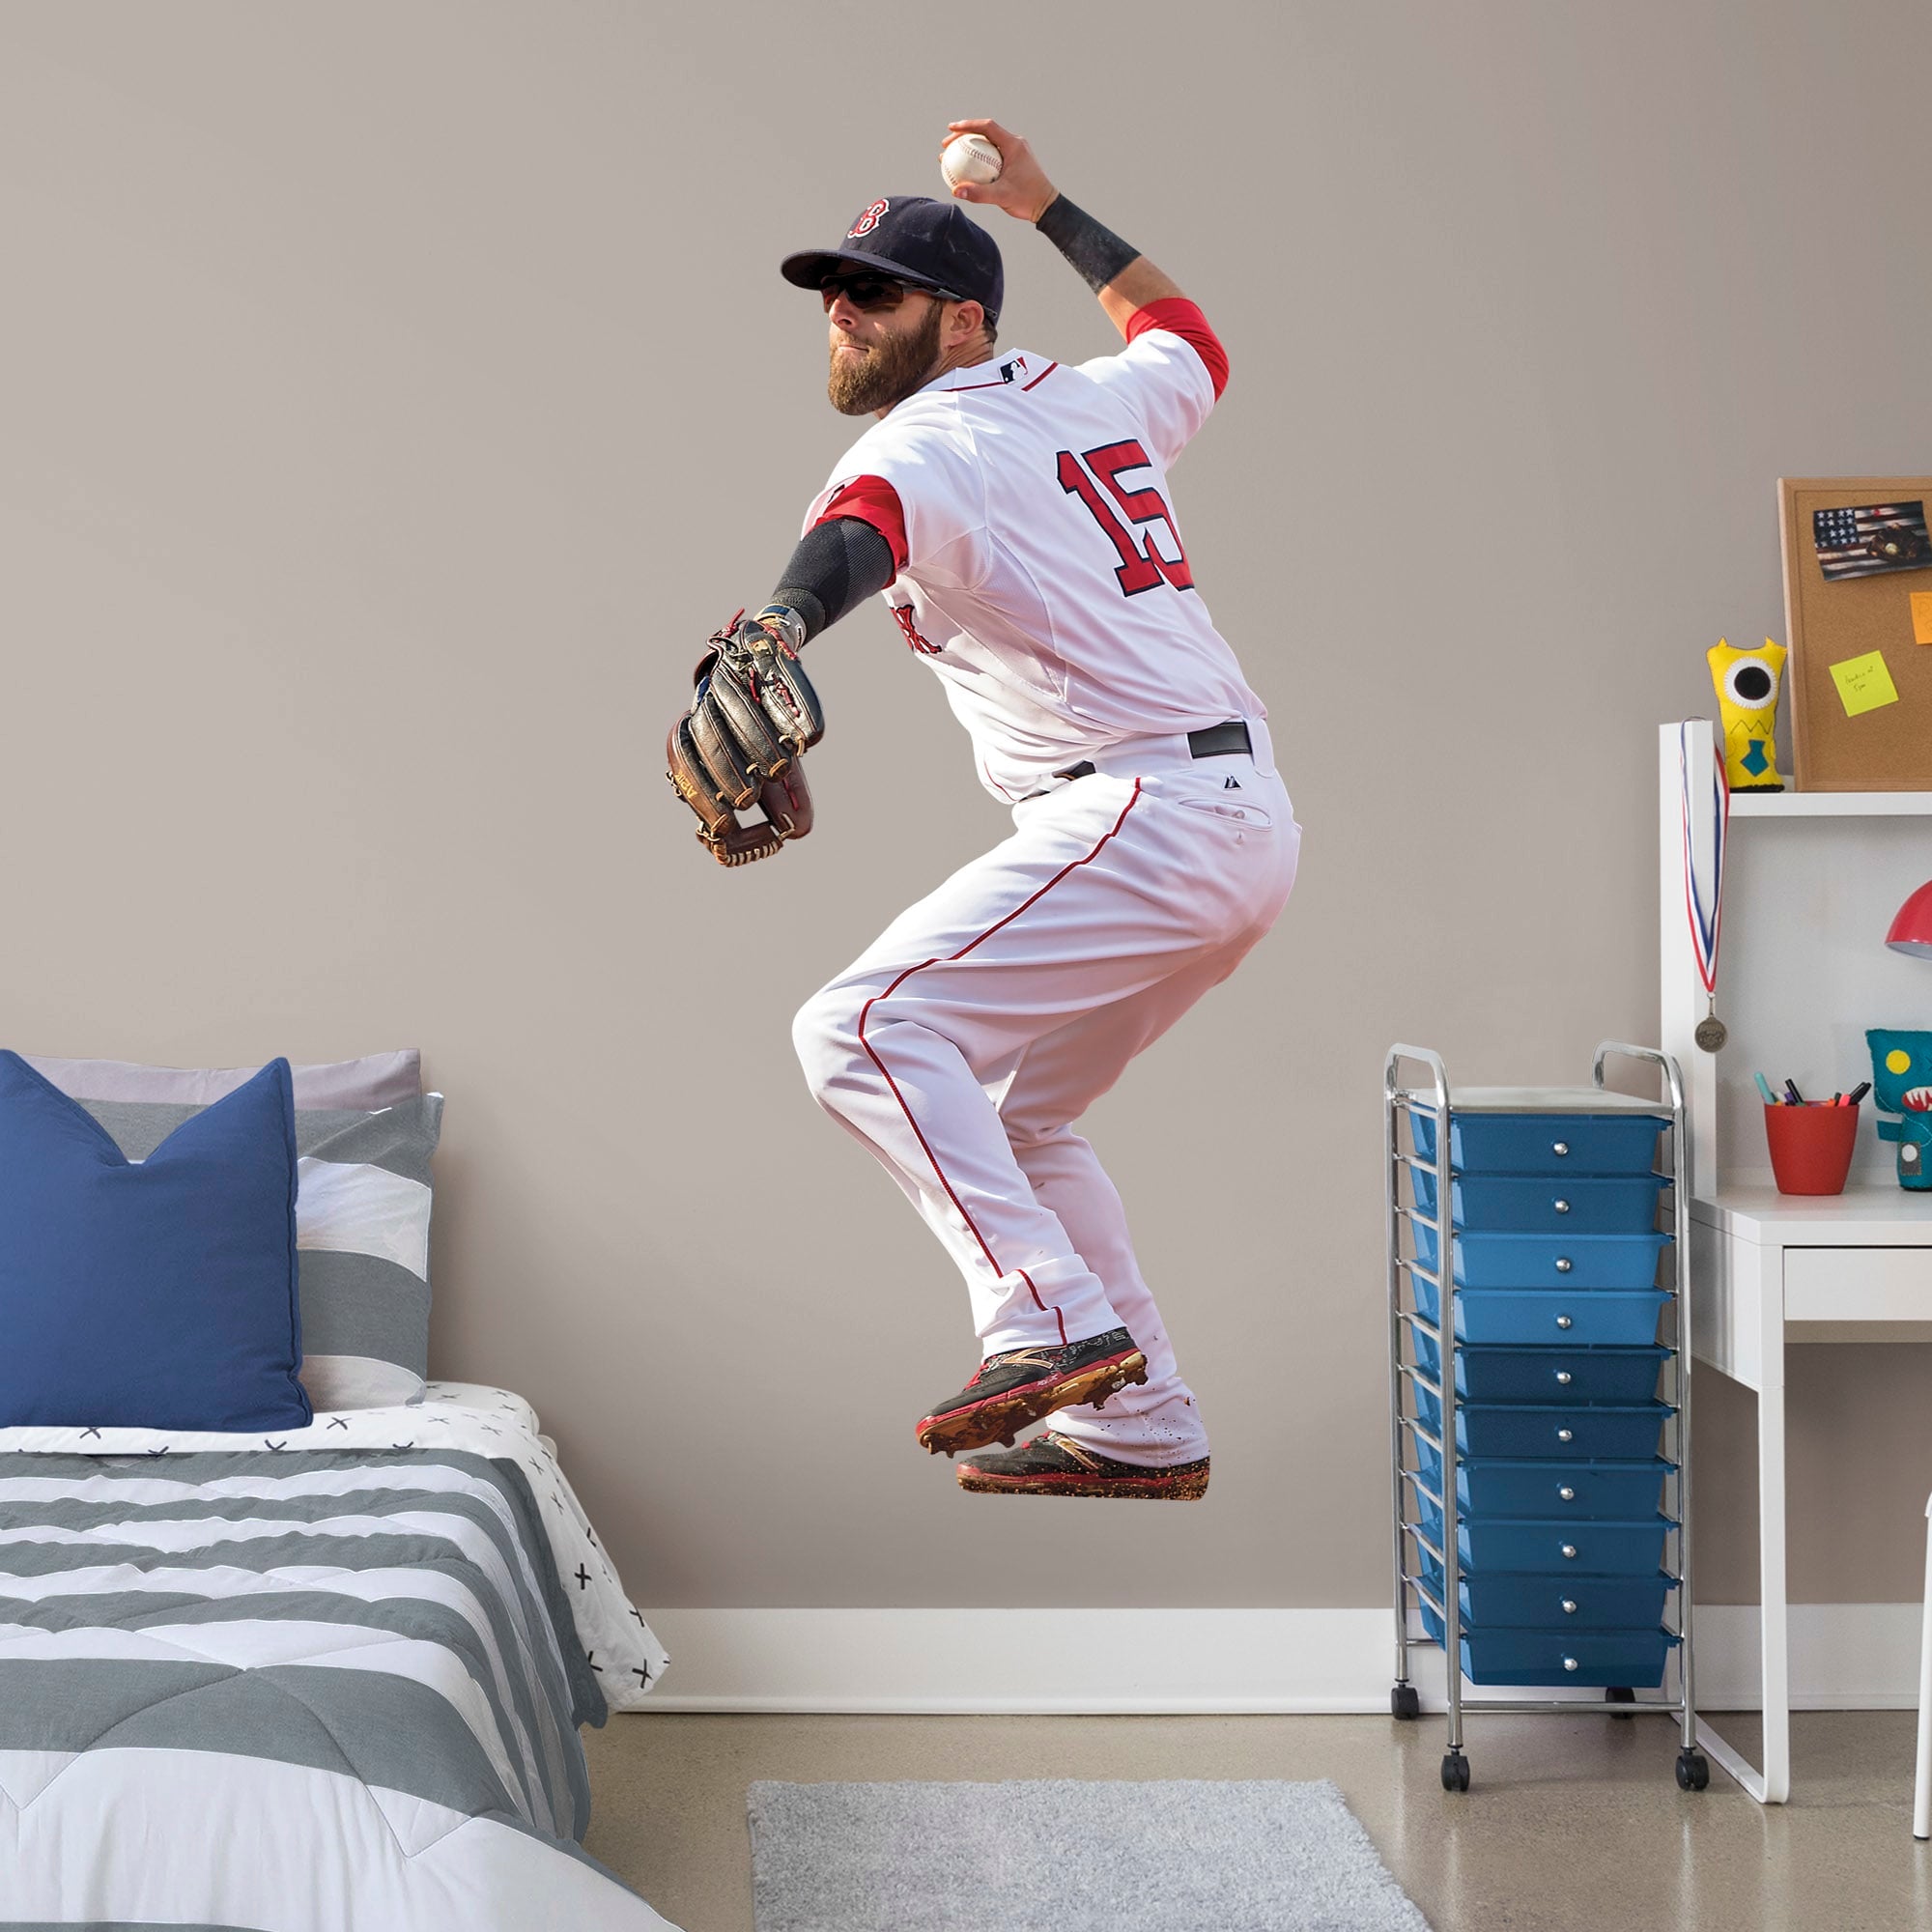 Dustin Pedroia for Boston Red Sox: Throwing - Officially Licensed MLB Removable Wall Decal Large by Fathead | Vinyl